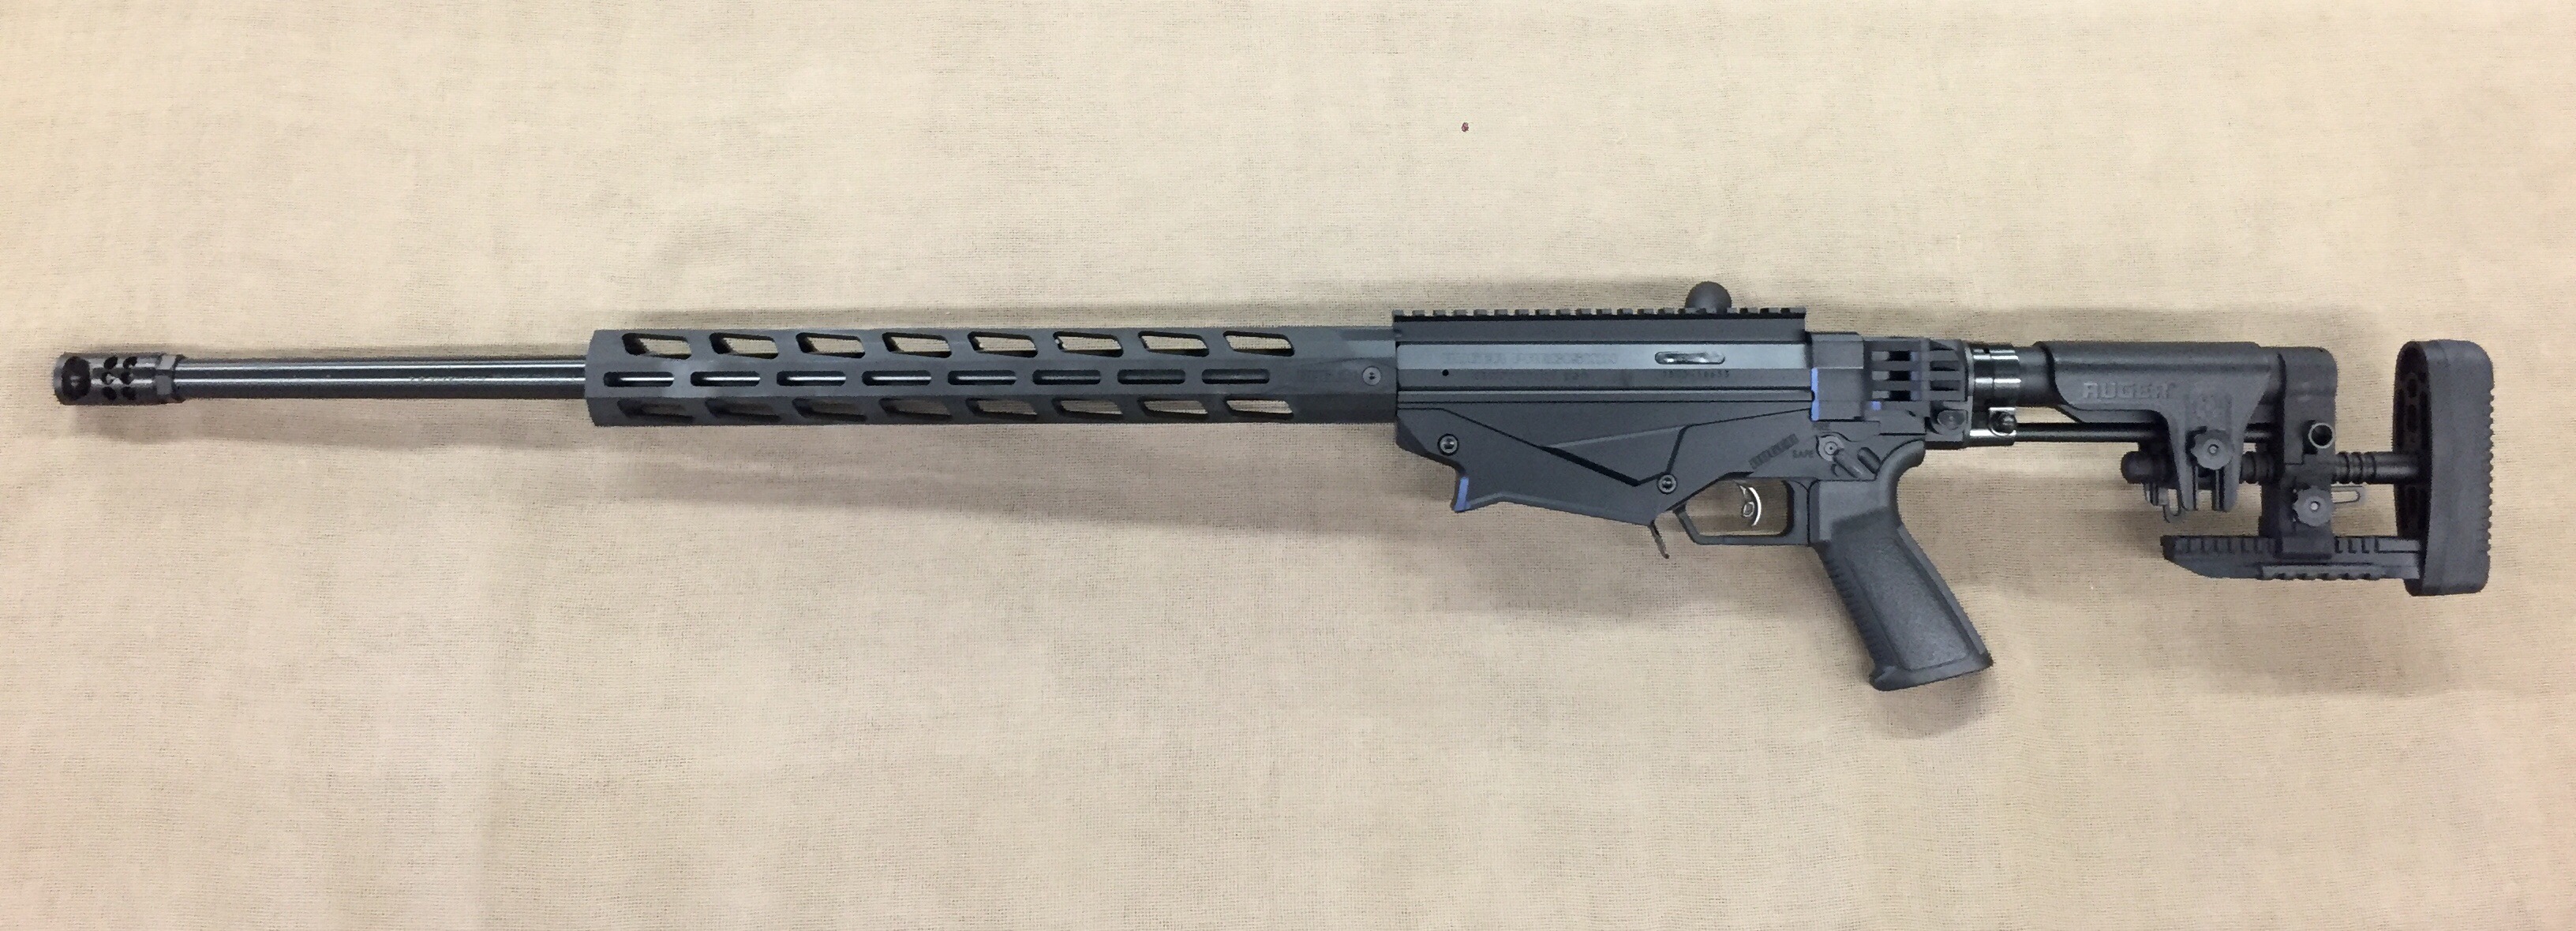 Ruger Precision Rifle 65 Creedmoor 24" Bbl - Saddle Rock Armory.